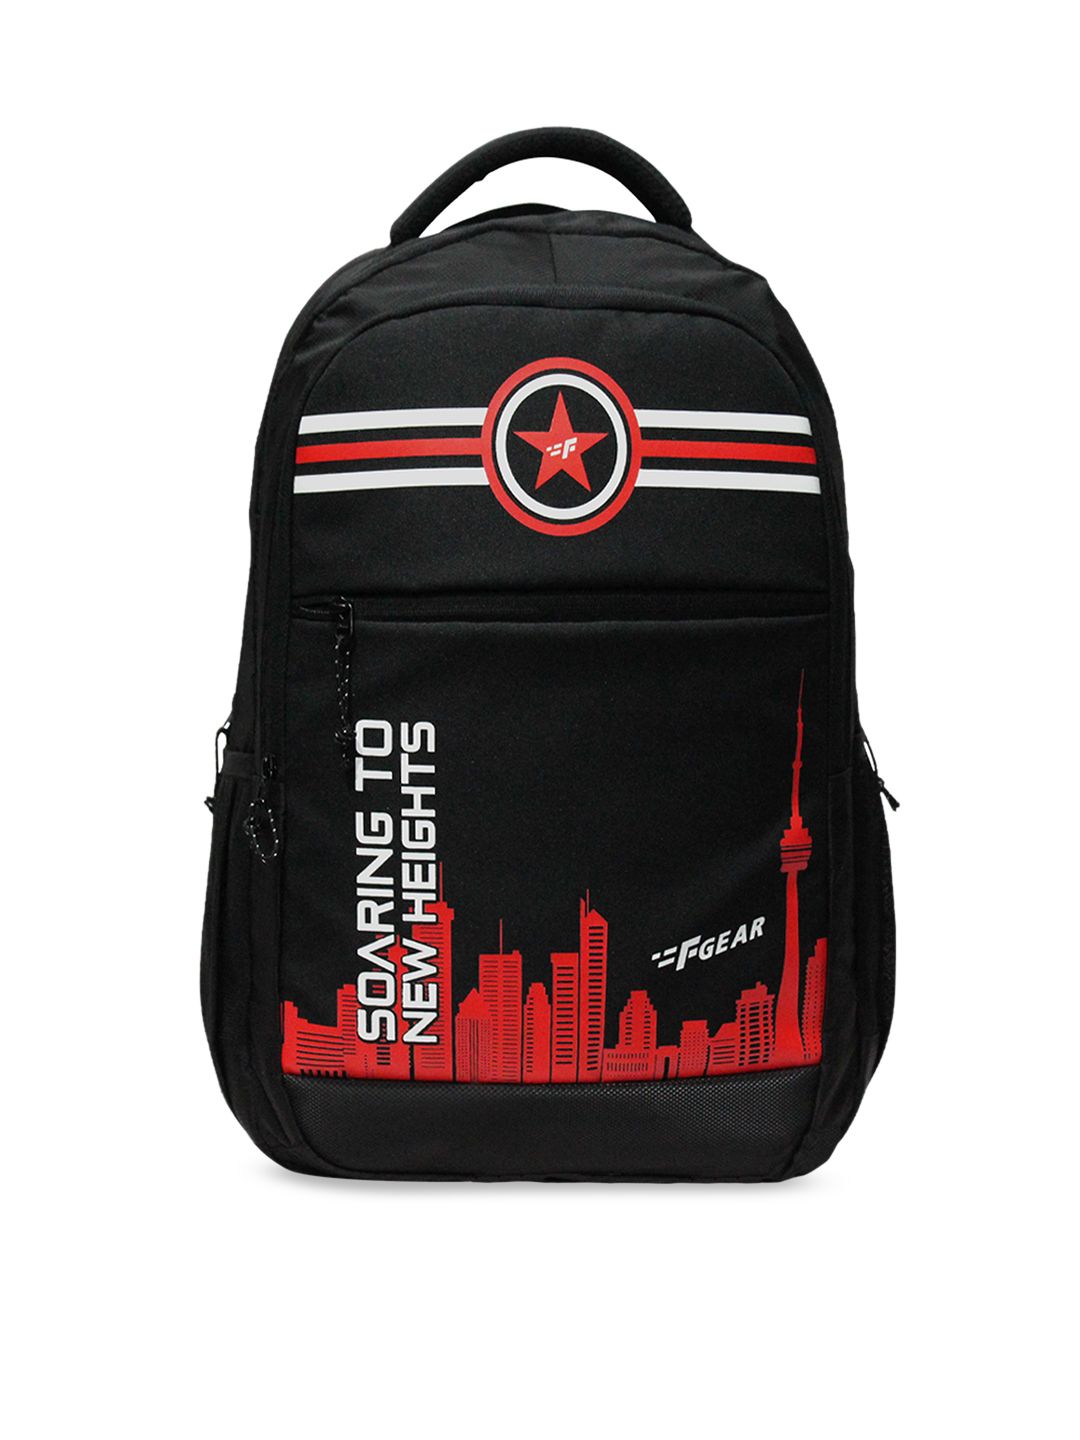 F Gear Unisex Black Graphic Backpack Price in India